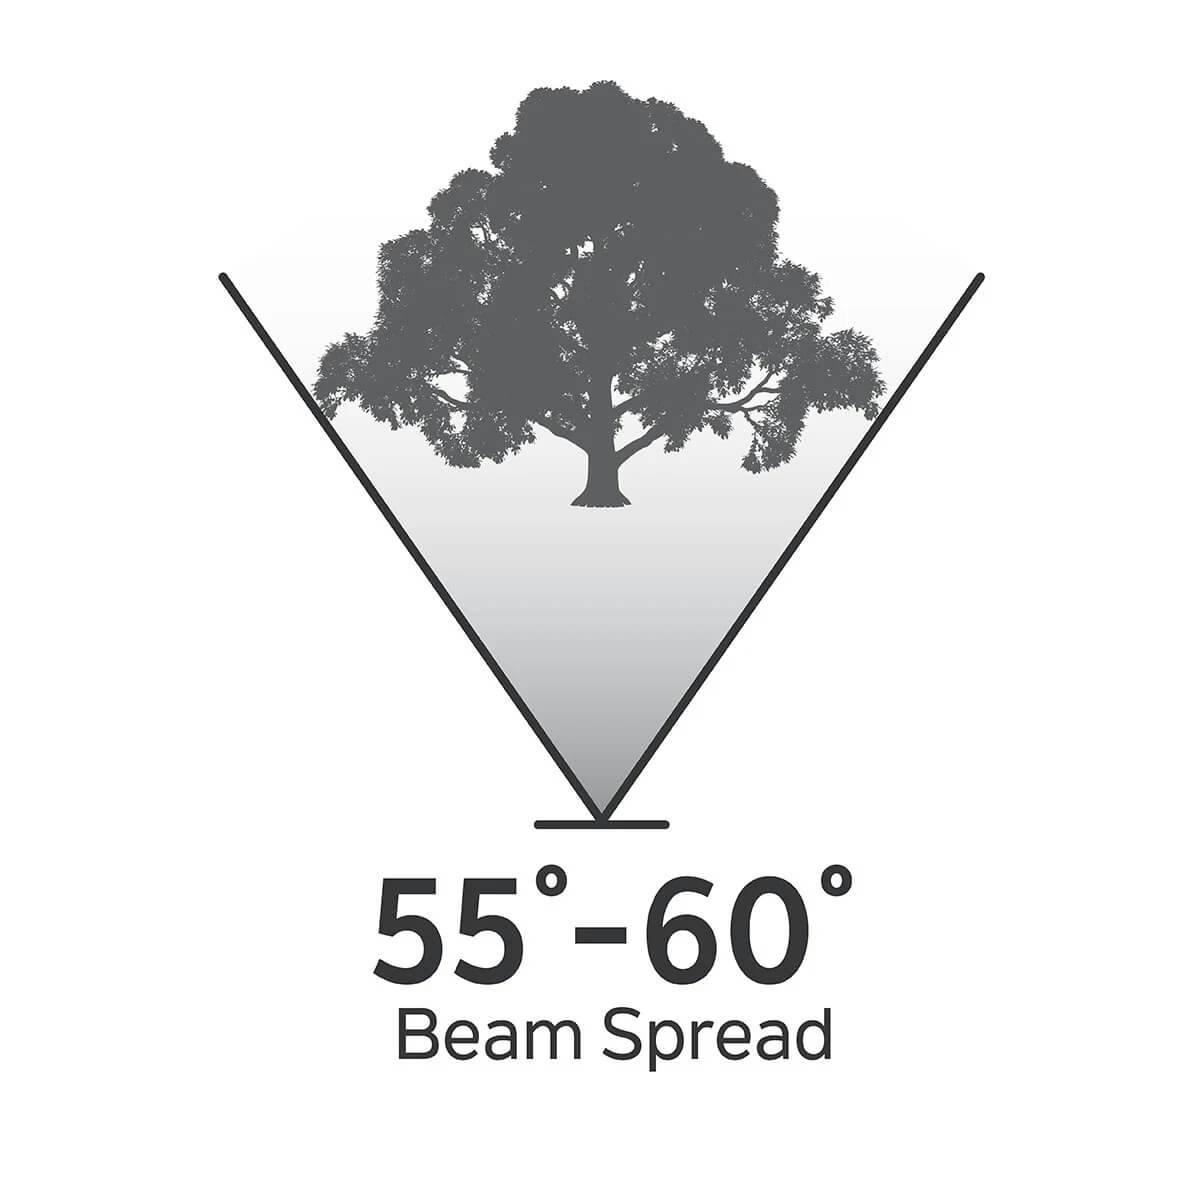 Illustration of a large tree with a 55 to 60 degree beam spread